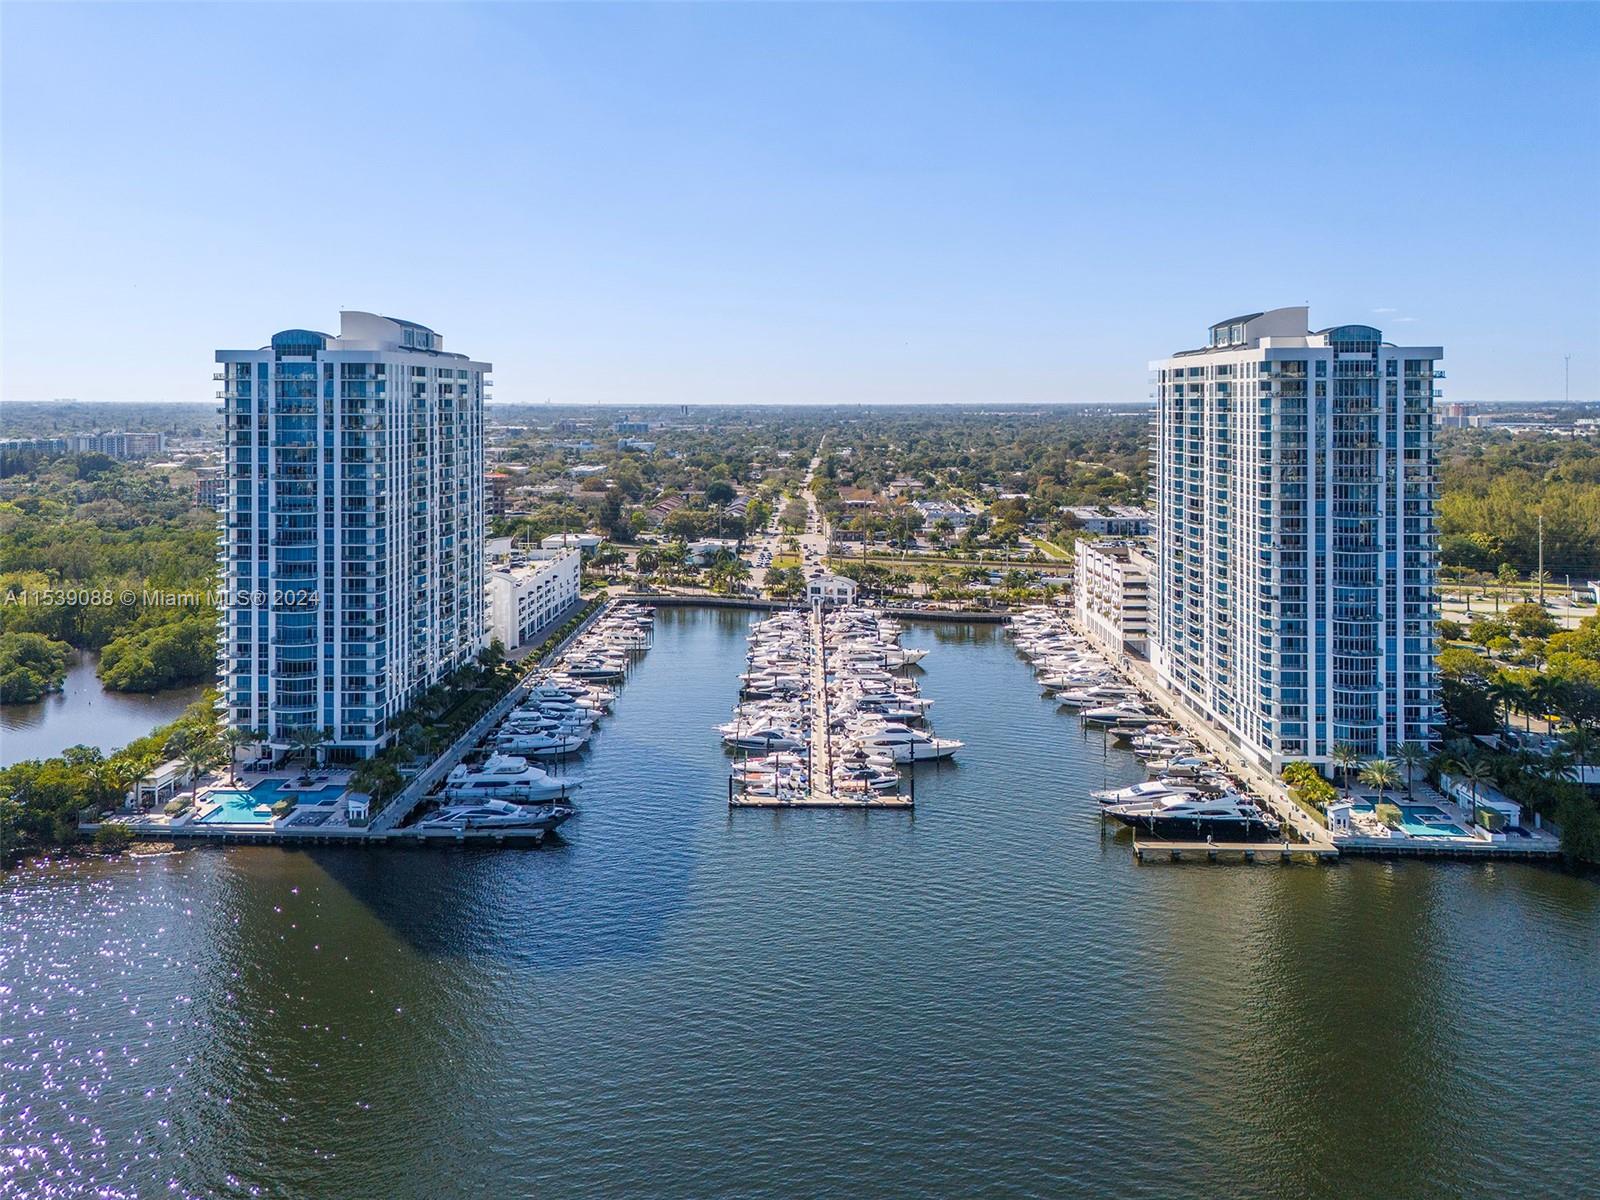 Stunning northwest corner unit, boasting elegance and functionality in every detail. This ready-to-move-in residence offers abundant natural light, featuring 2BR/2.5BA, plus a den/office/media room and laundry room.  Sweeping bay panoramas, capturing the beauty of the Intracoastal Waterways and the mesmerizing city lights stretching into the horizon. Large balcony invites relaxation and top of the line kitchen for hosting and family living.  Motorized drapes enhancing privacy and custom Ornare closets in the bedrooms. Steps from fine dining and the renowned Aventura Mall, as well Sunny Isles and Bal Harbour.  Indulge in 5-star amenities including a state-of-the-art gym, spa, pool deck, kids play area, café and more.  For boaters, the adjacent marina offers convenient access for your yacht!